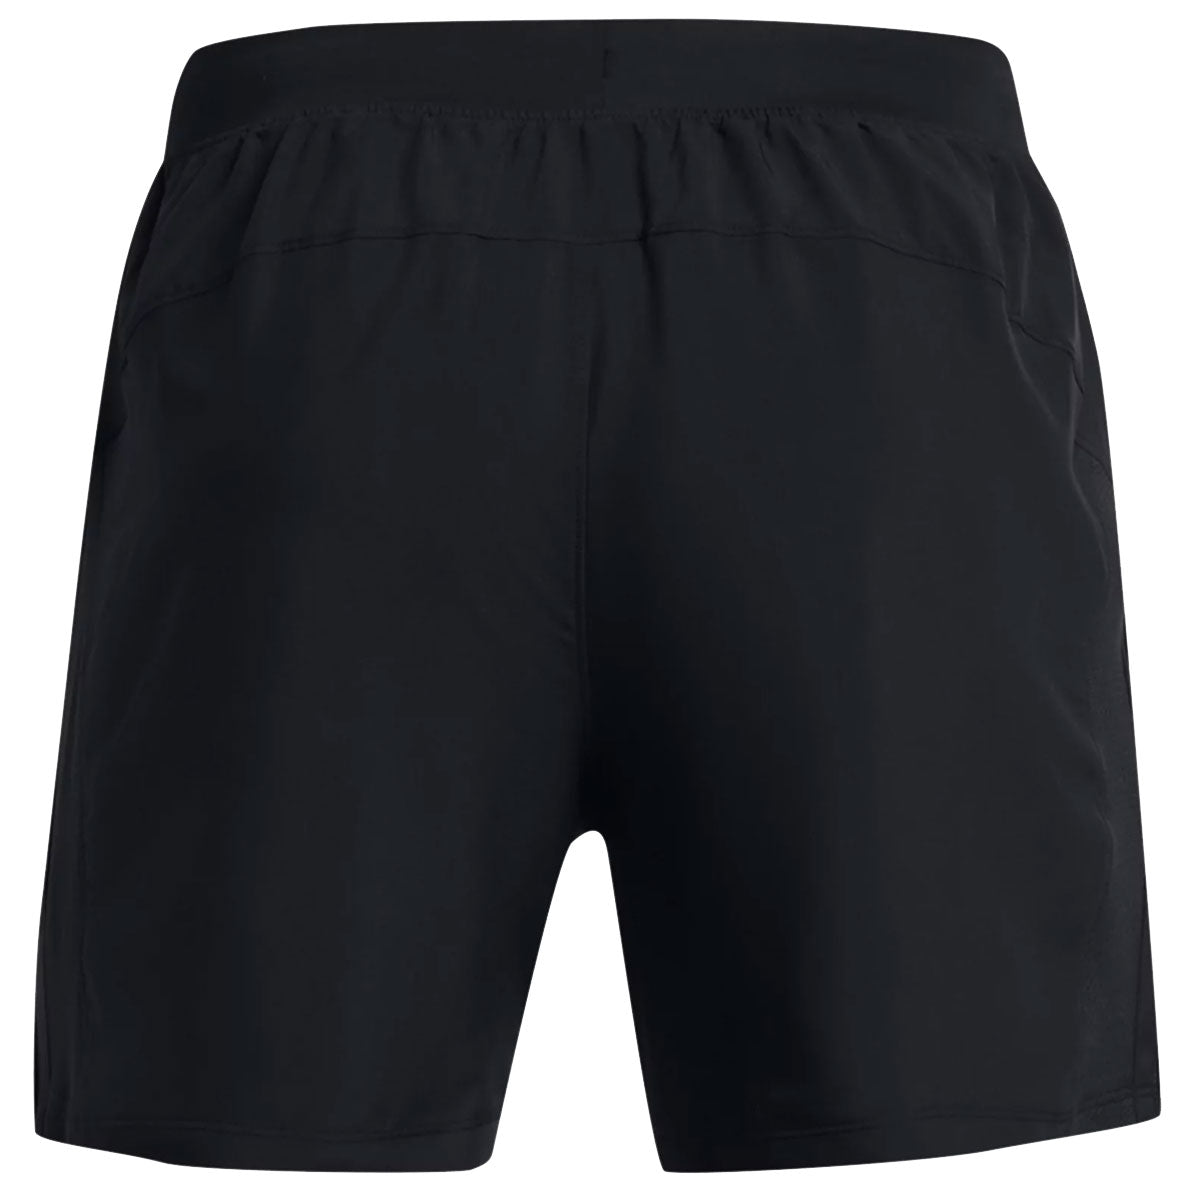 Under Armour Launch 5 inch Running Shorts - Mens - Black/Reflective